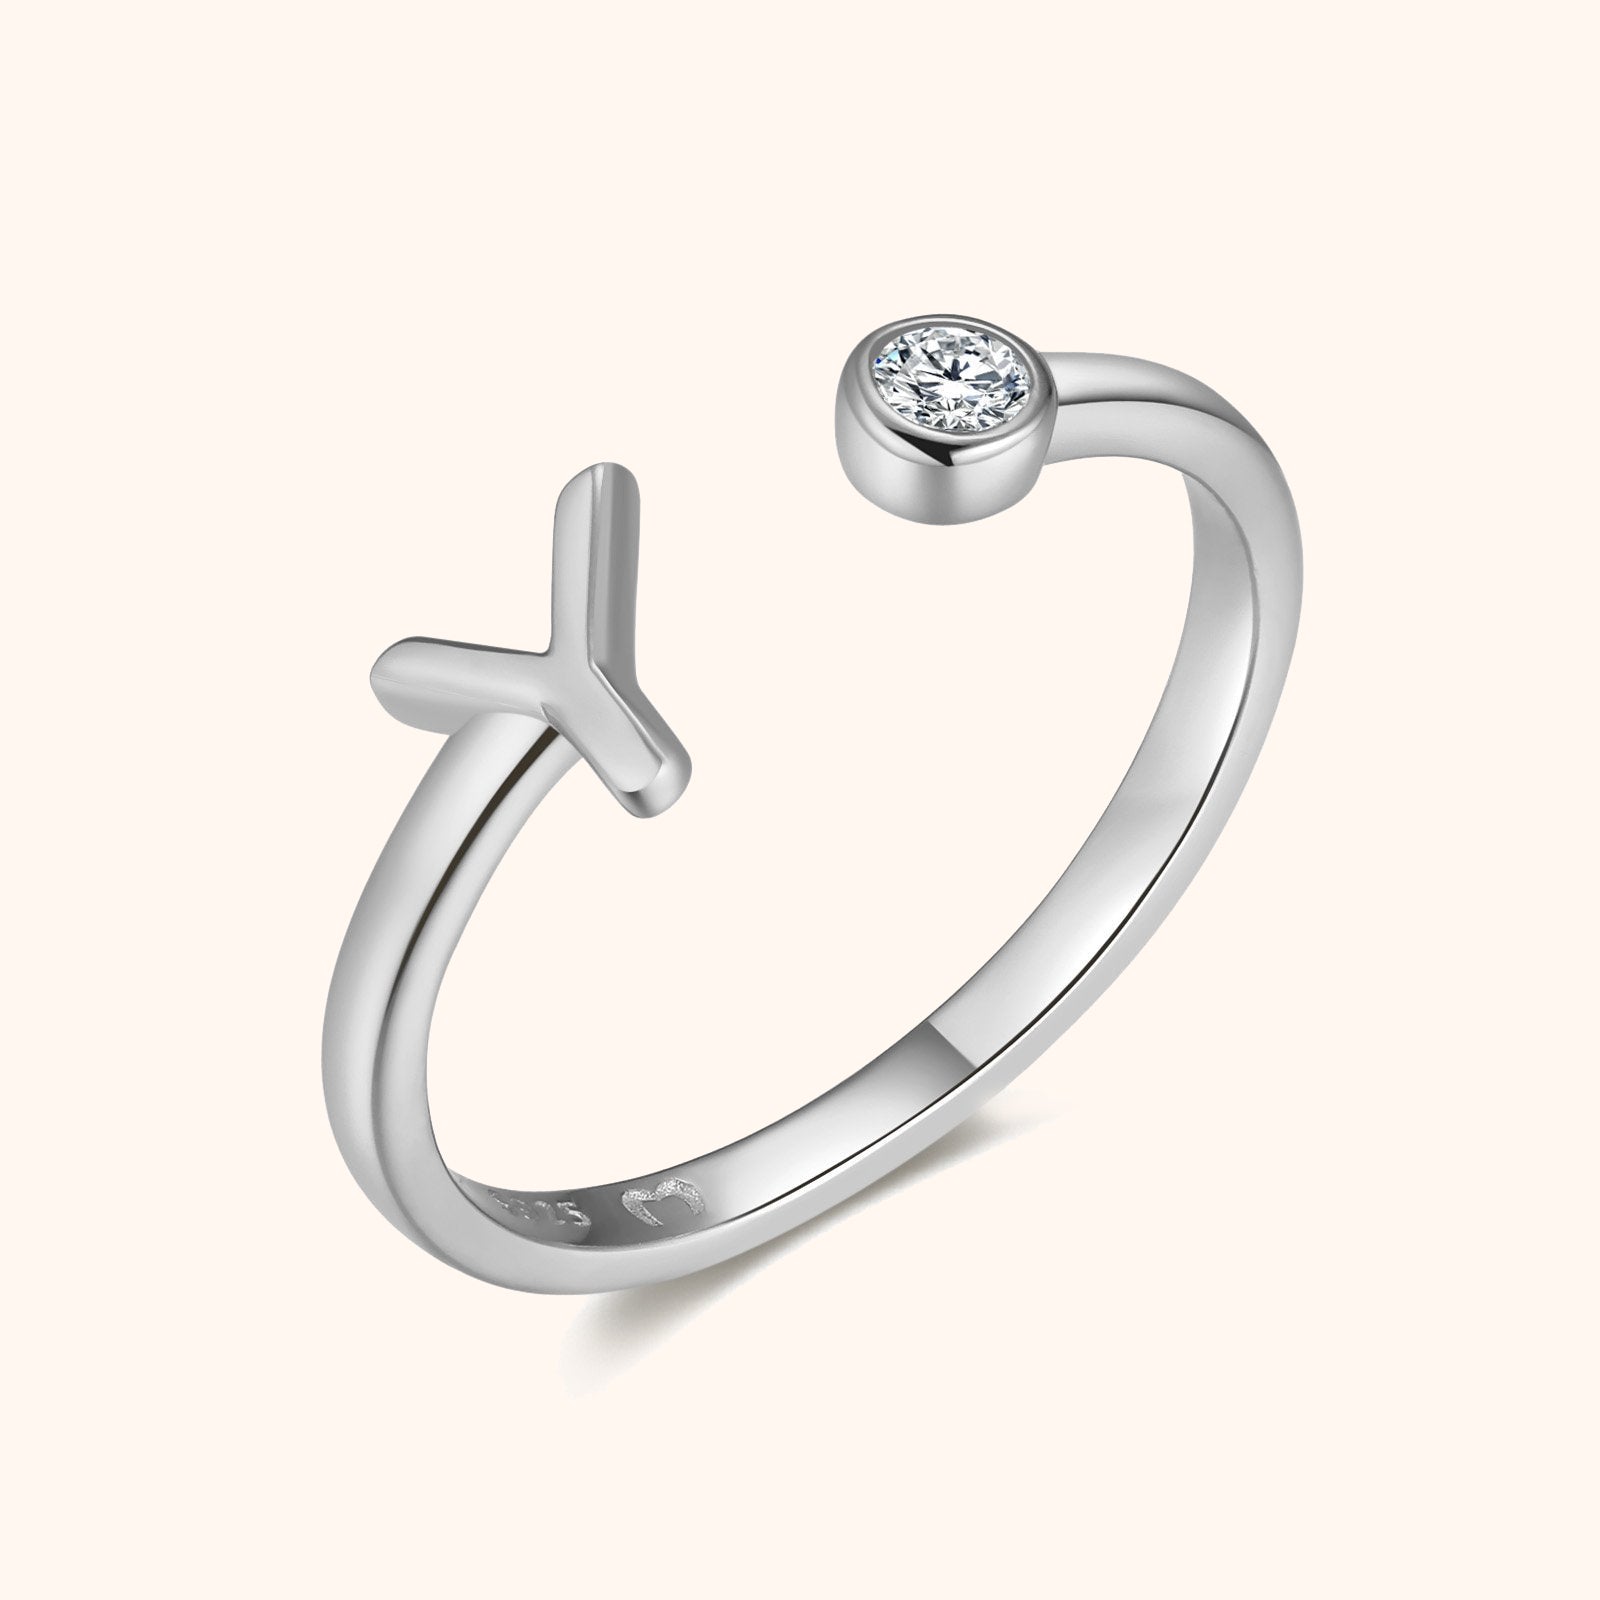 "Top Letter" Ring